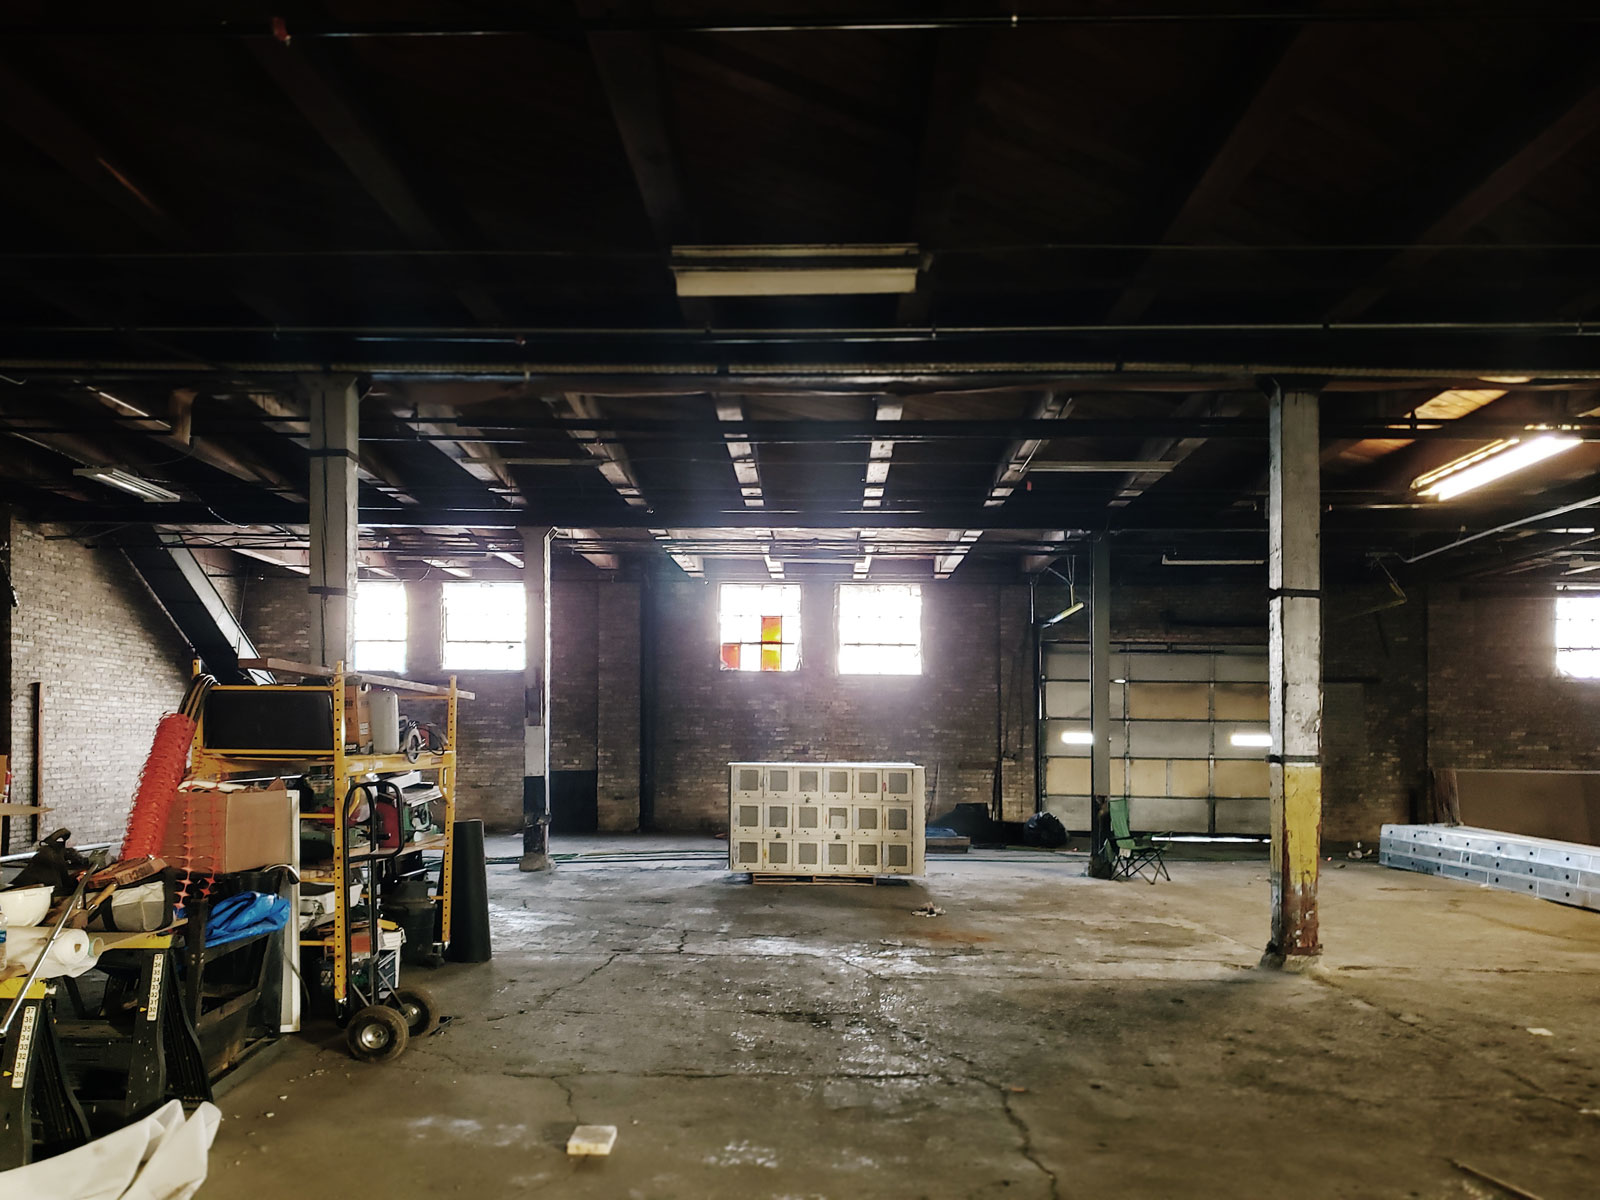 An empty industrial space, ripe for creativity.